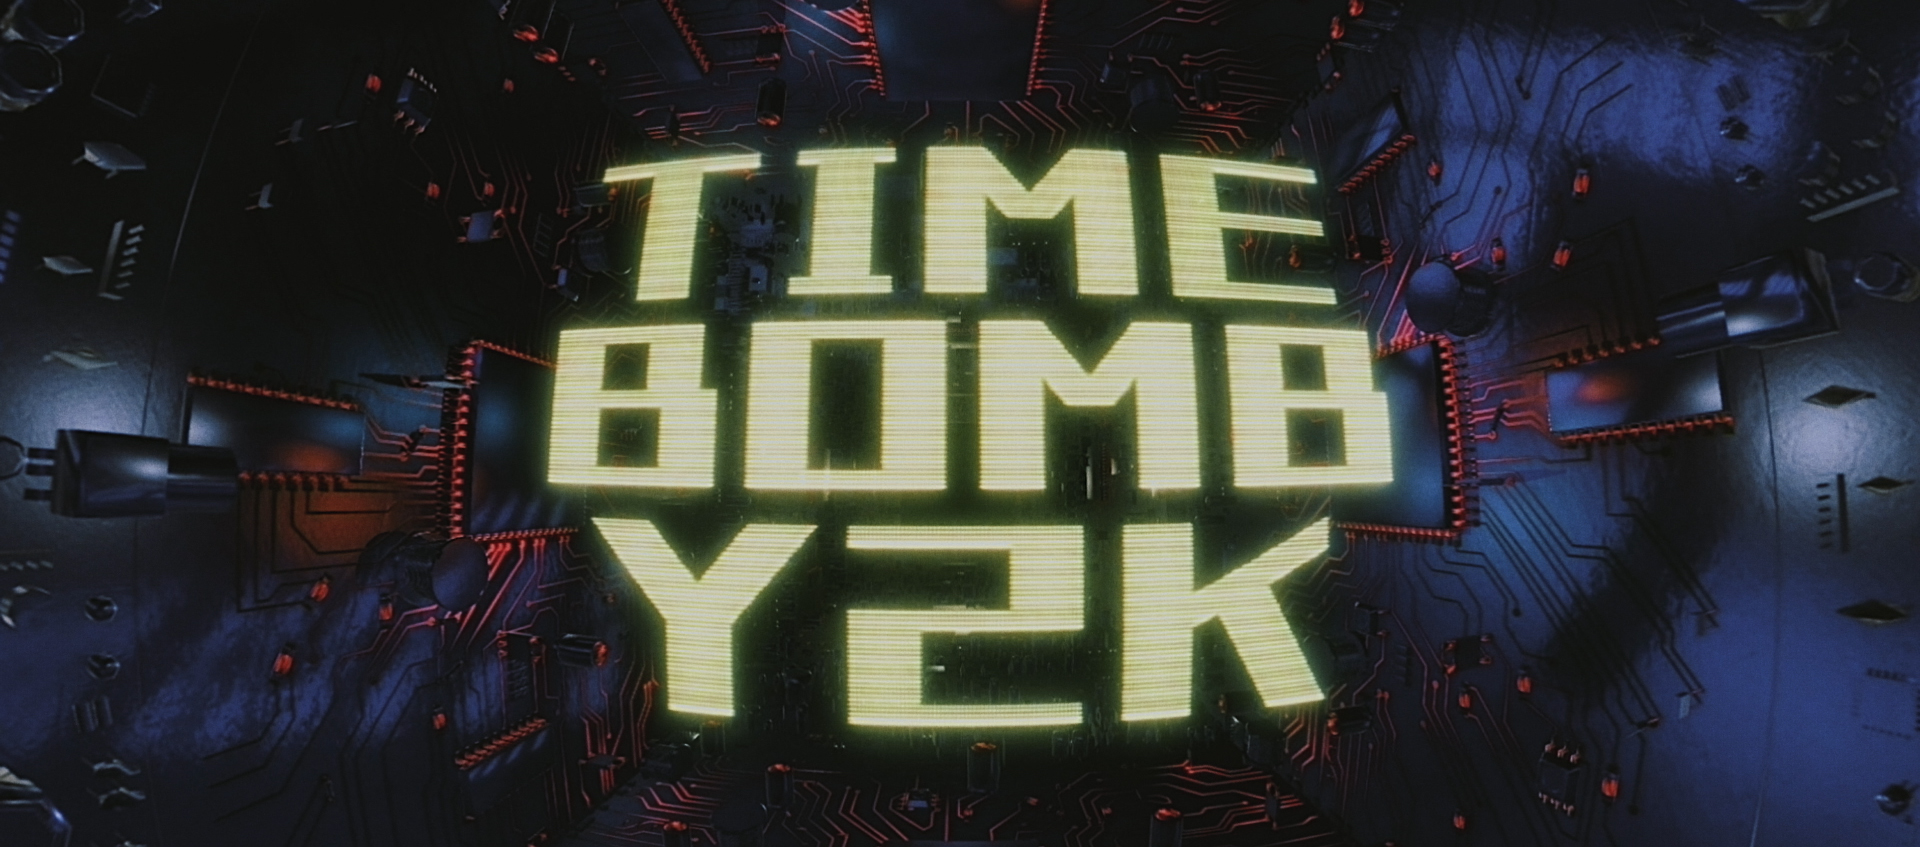  “TIME BOMB Y2K” in block yellow letters stylized to like digital screens surrounded by graphics that look like computer chips.  